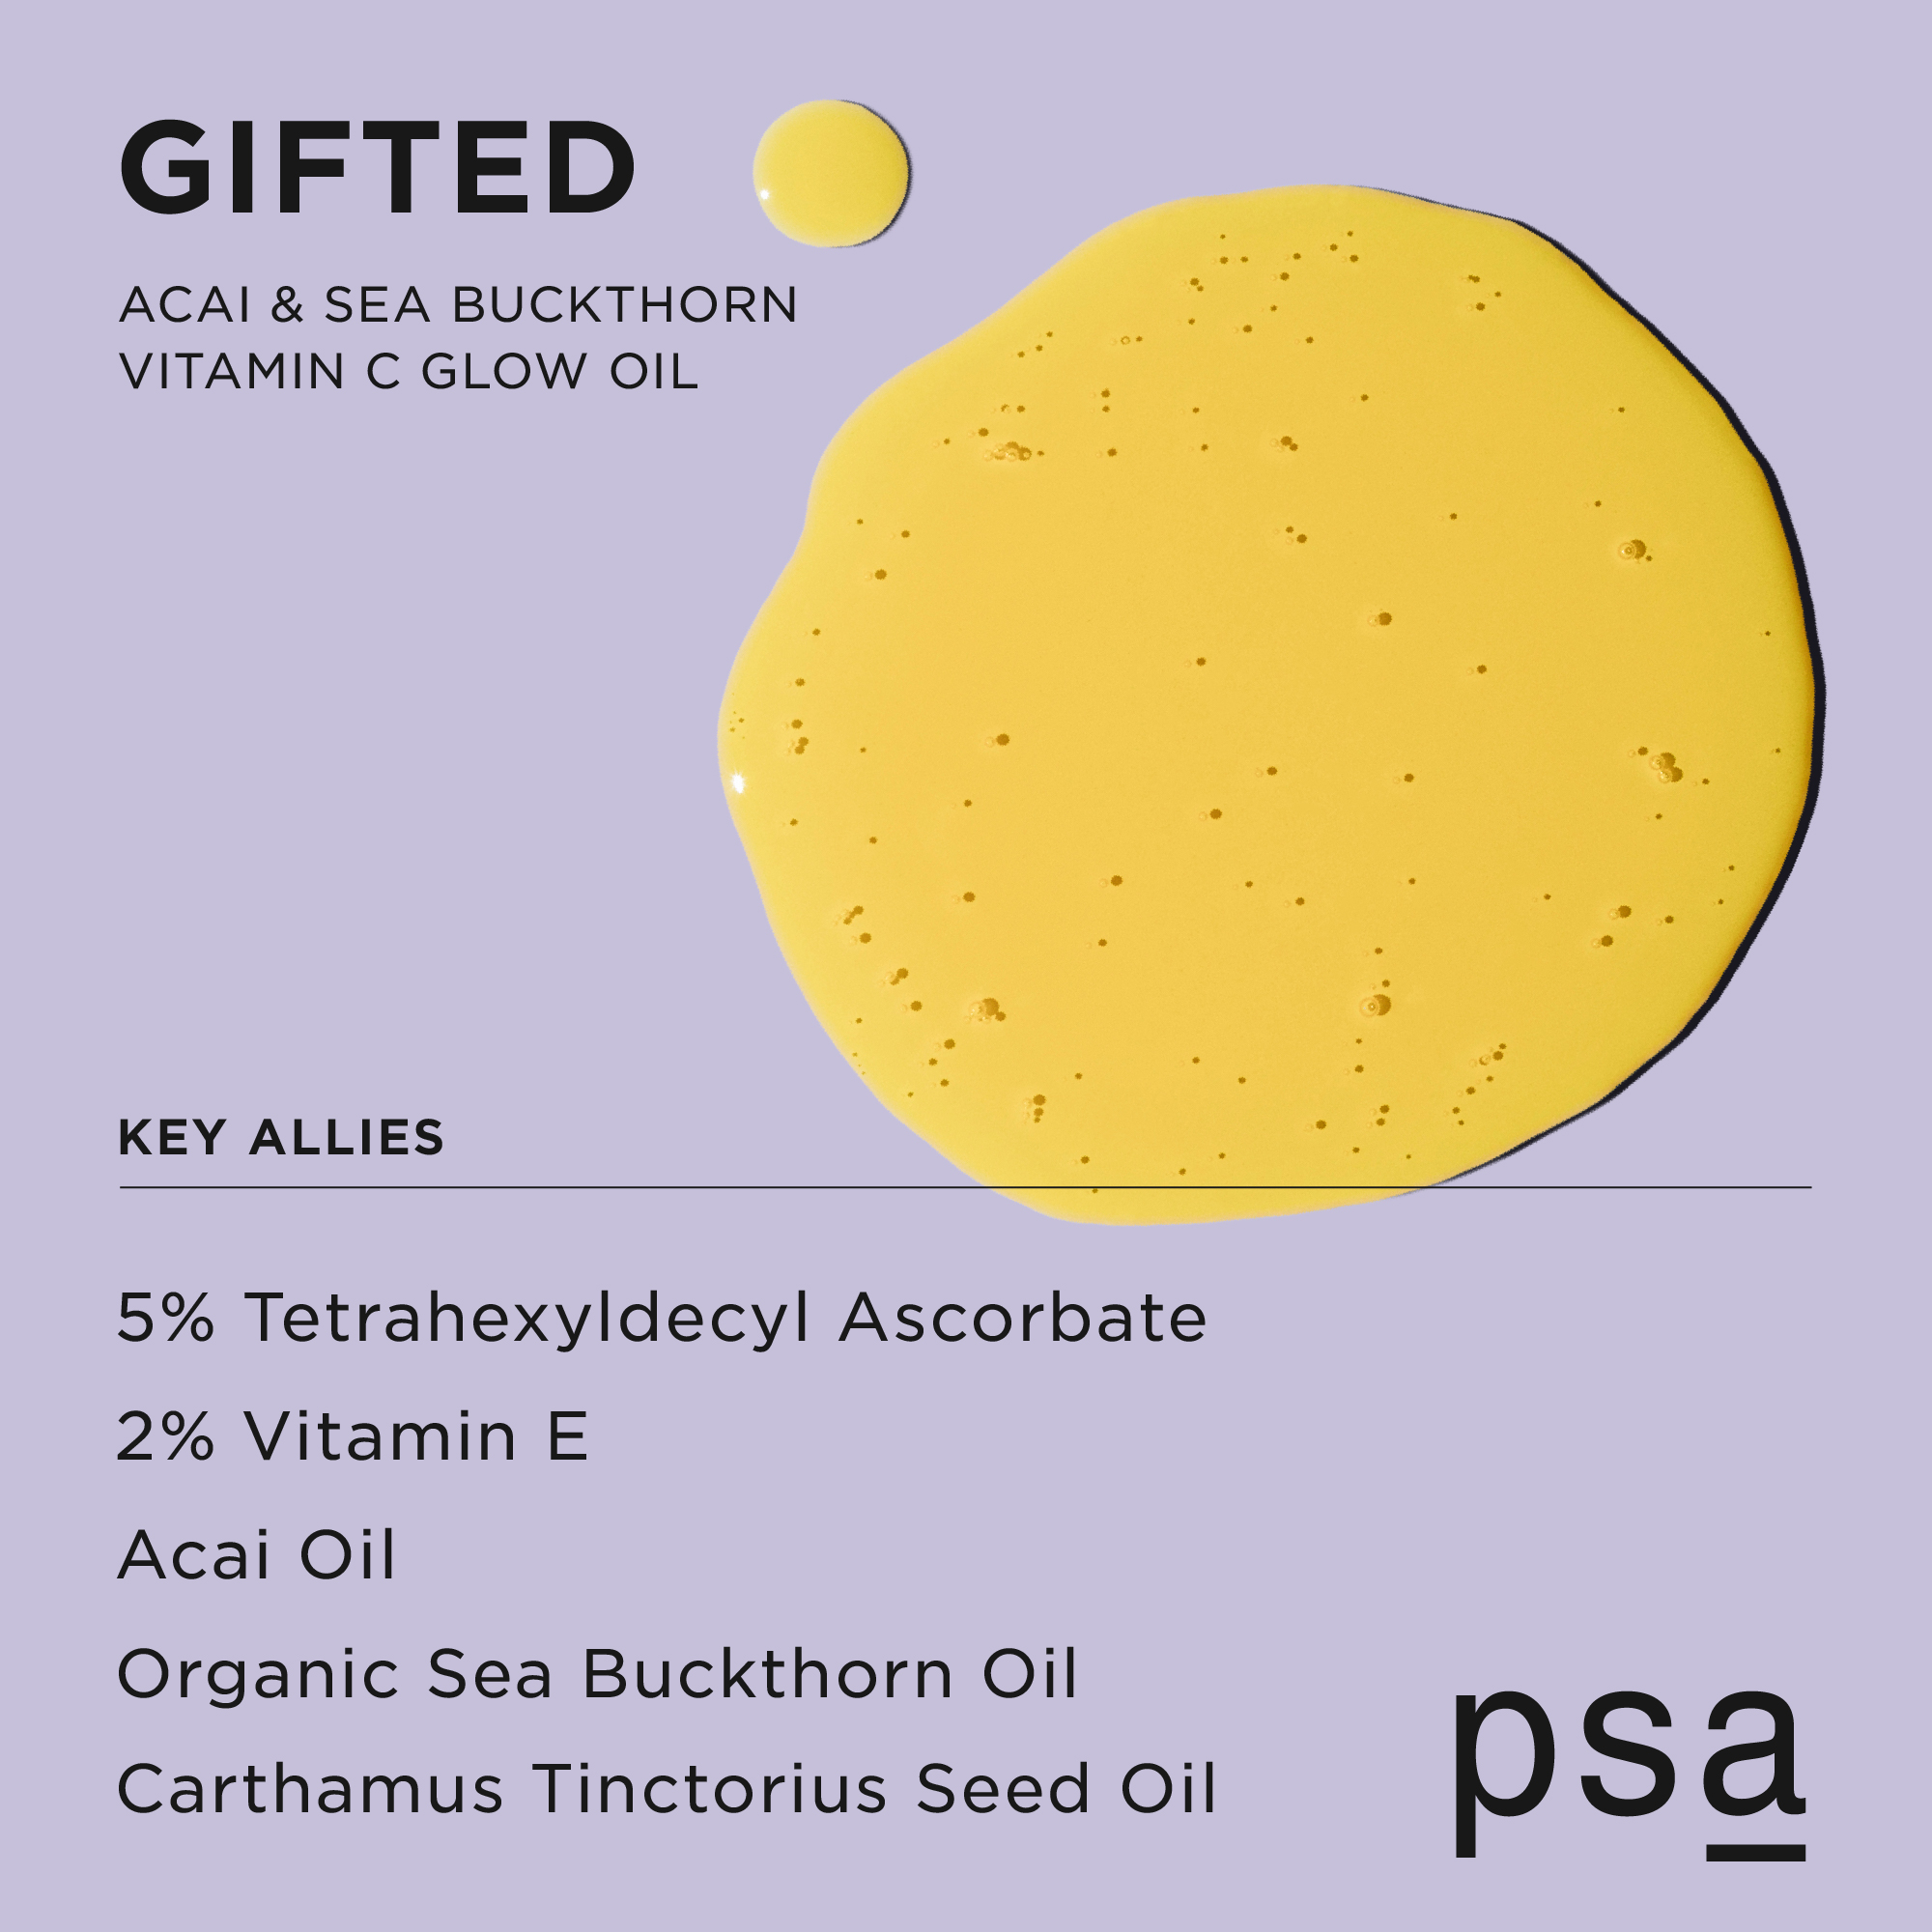 PSA GIFTED Acai and Sea Buckthorn Vitamin C Glow Oil, For All Skin Types, 0.5 fl oz/15 ml, Vegan - image 3 of 11